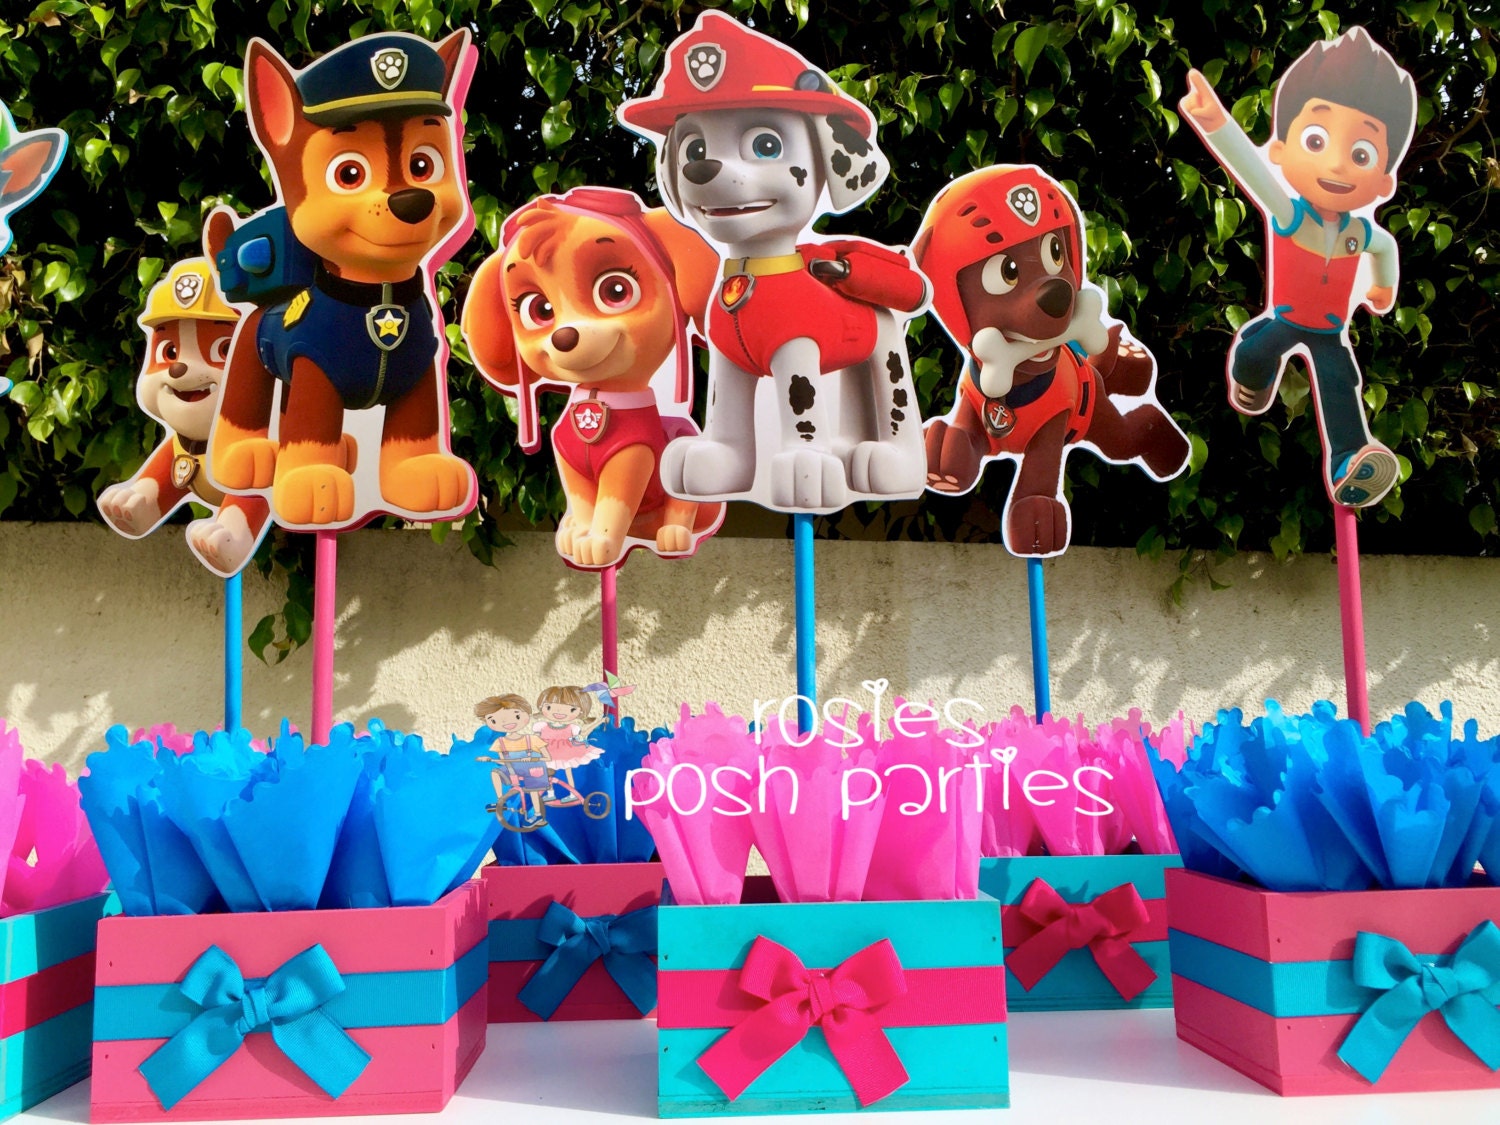 Paw Patrol Centerpieces Pink Paw Patrol centerpieces for